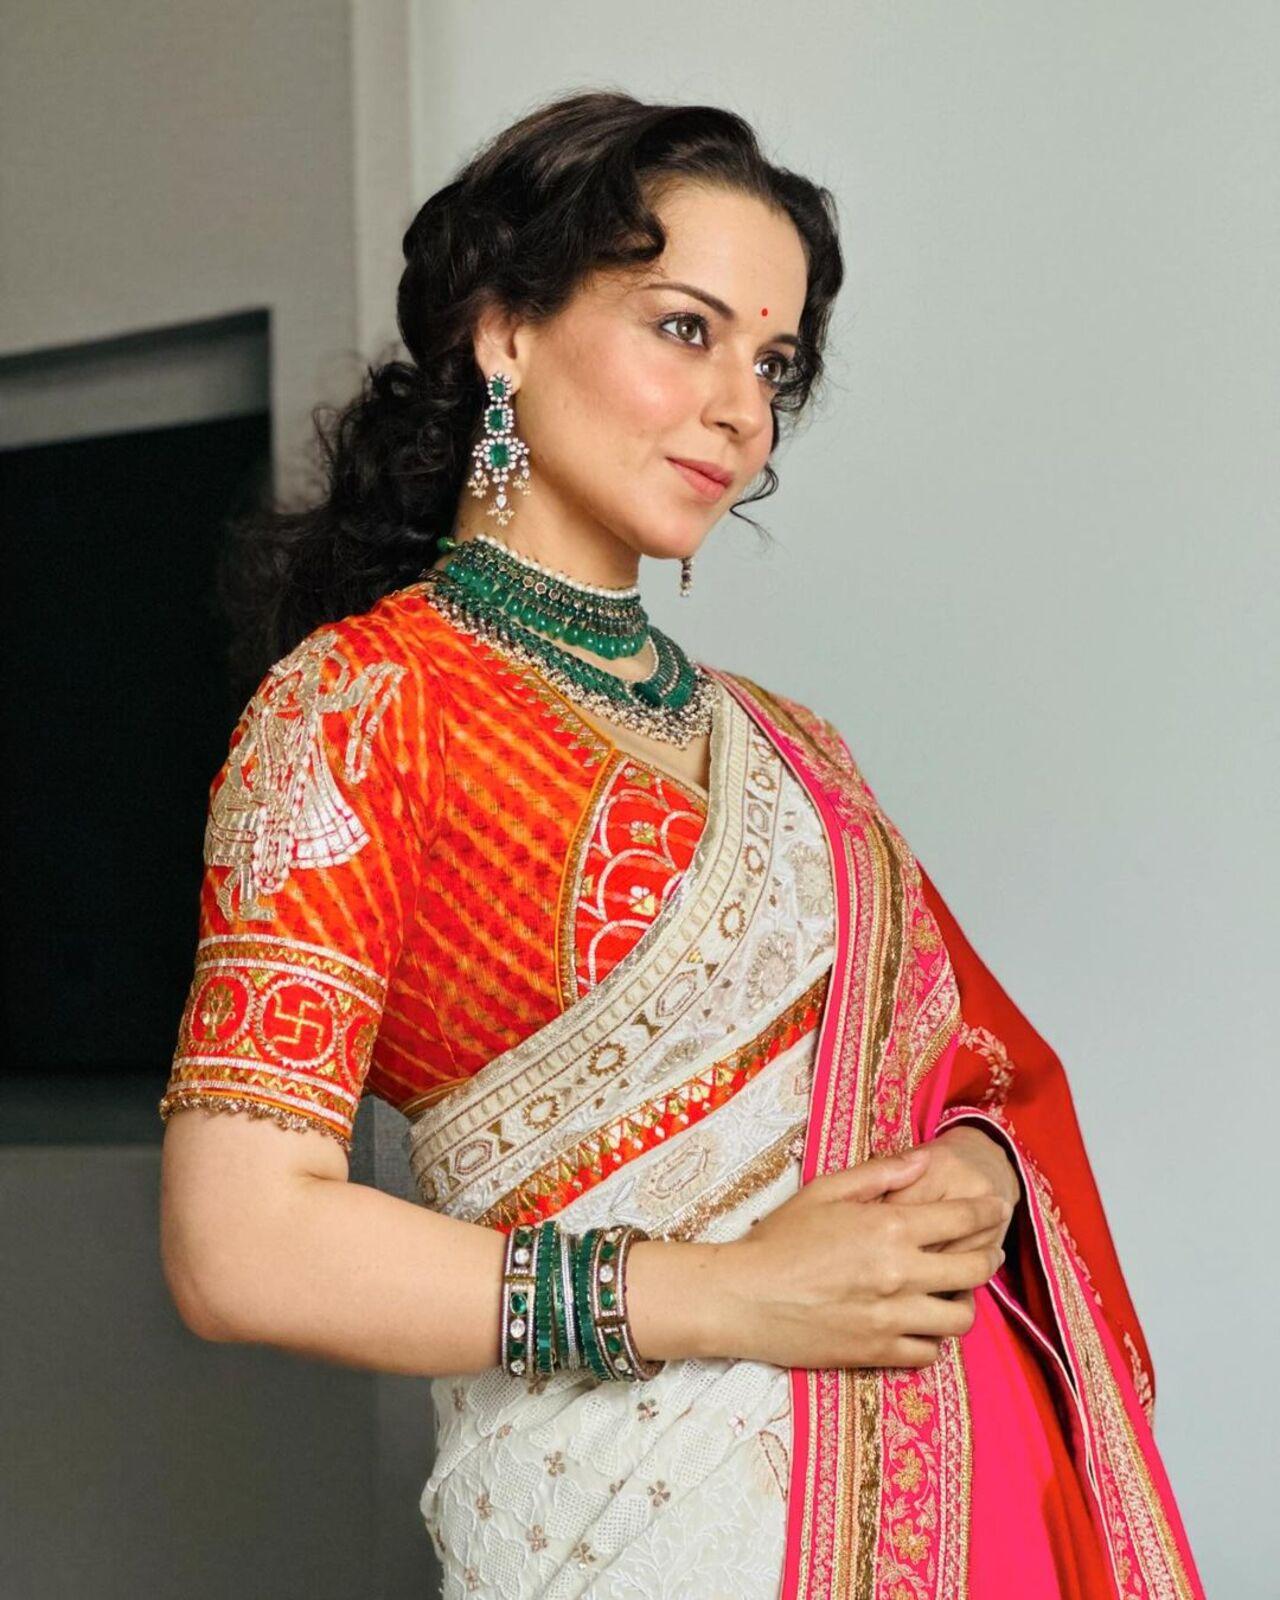 She was seen dressed in a gorgeous saree. Kangana paired the orange and white saree with contrasting green jewellery